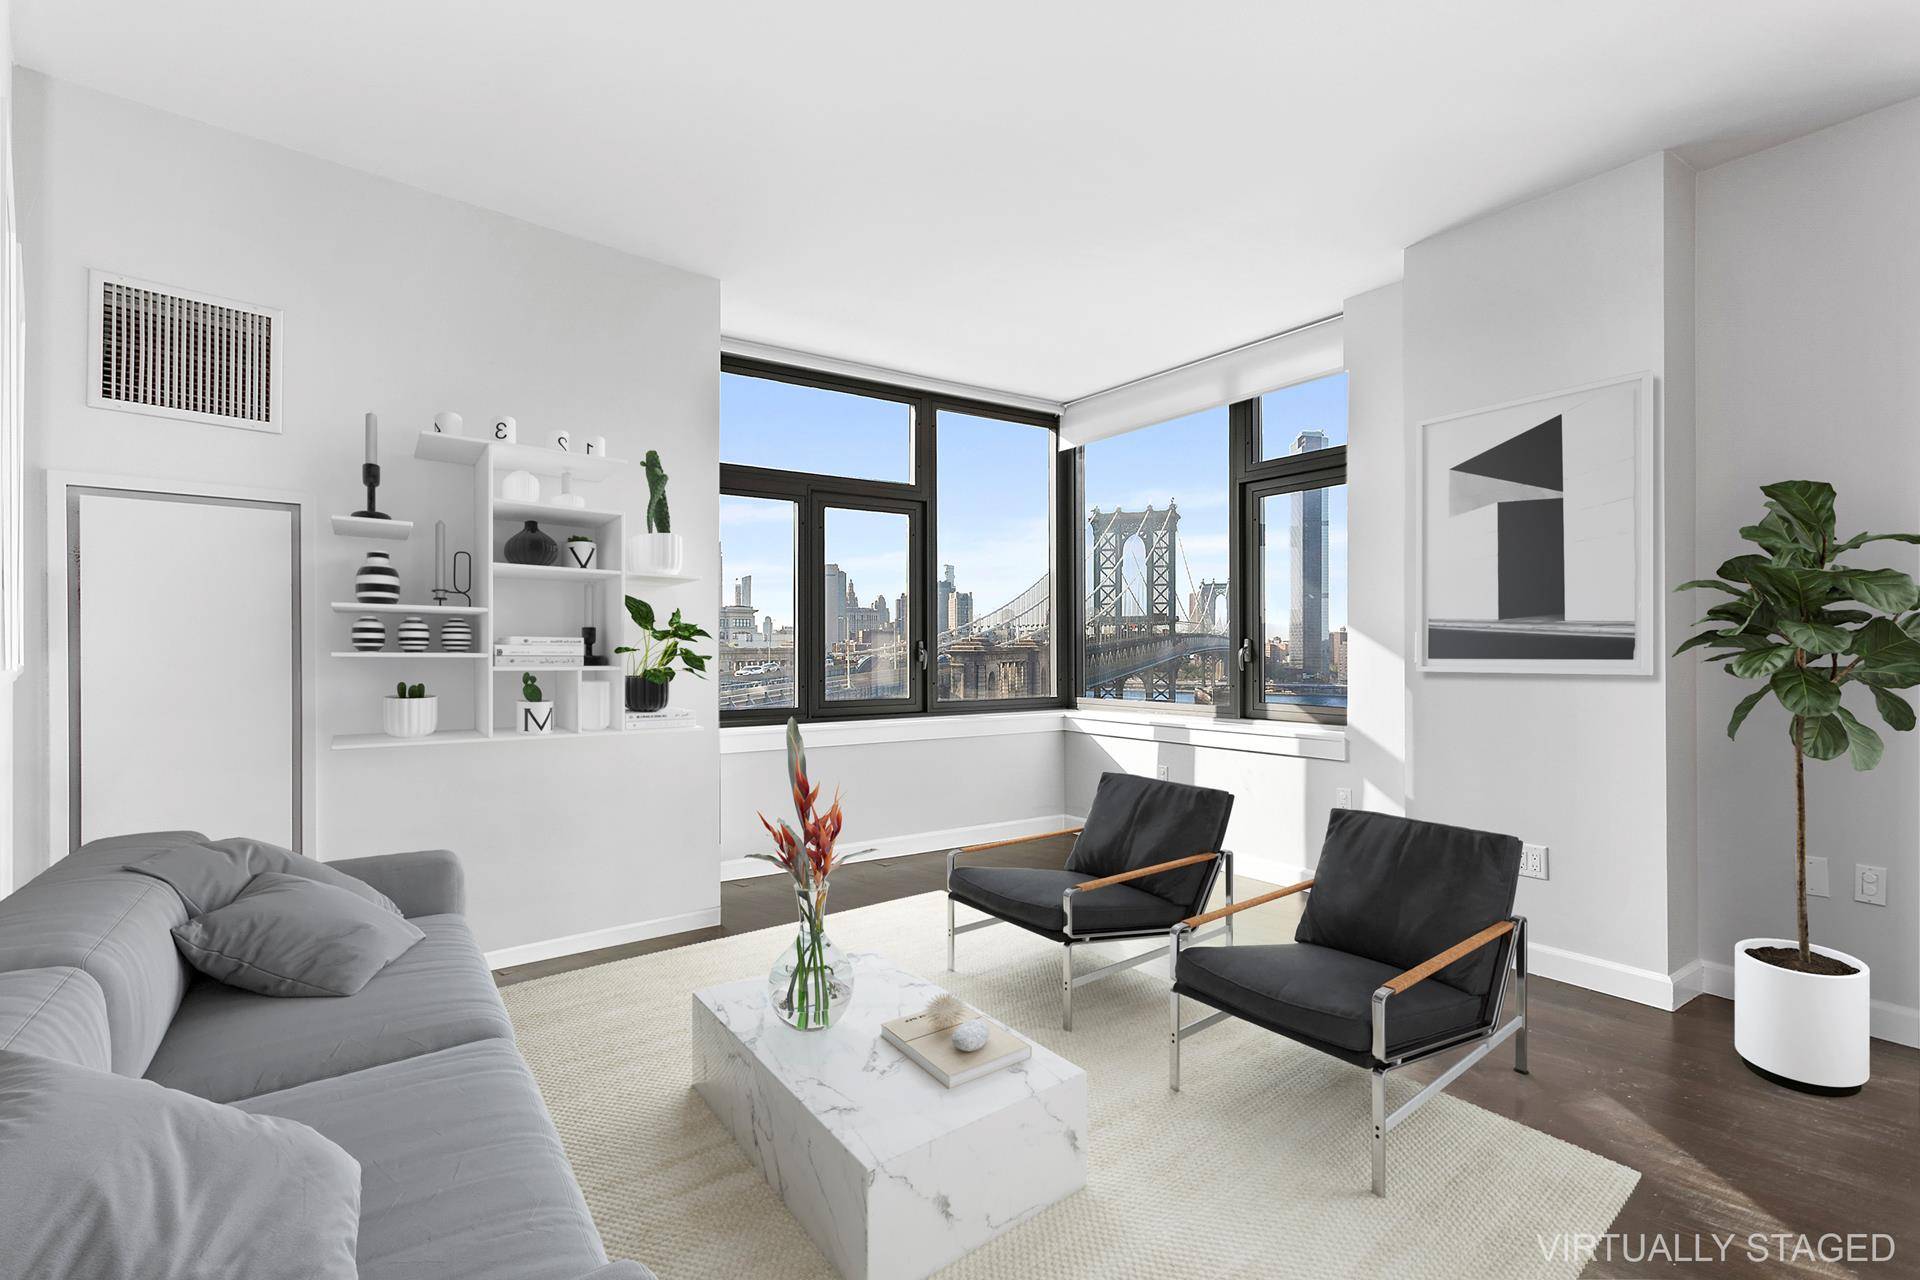 This exceptional 1223 square foot home in the desirable A line at J Condominium is an extraordinary residence featuring striking views facing the Manhattan skyline.